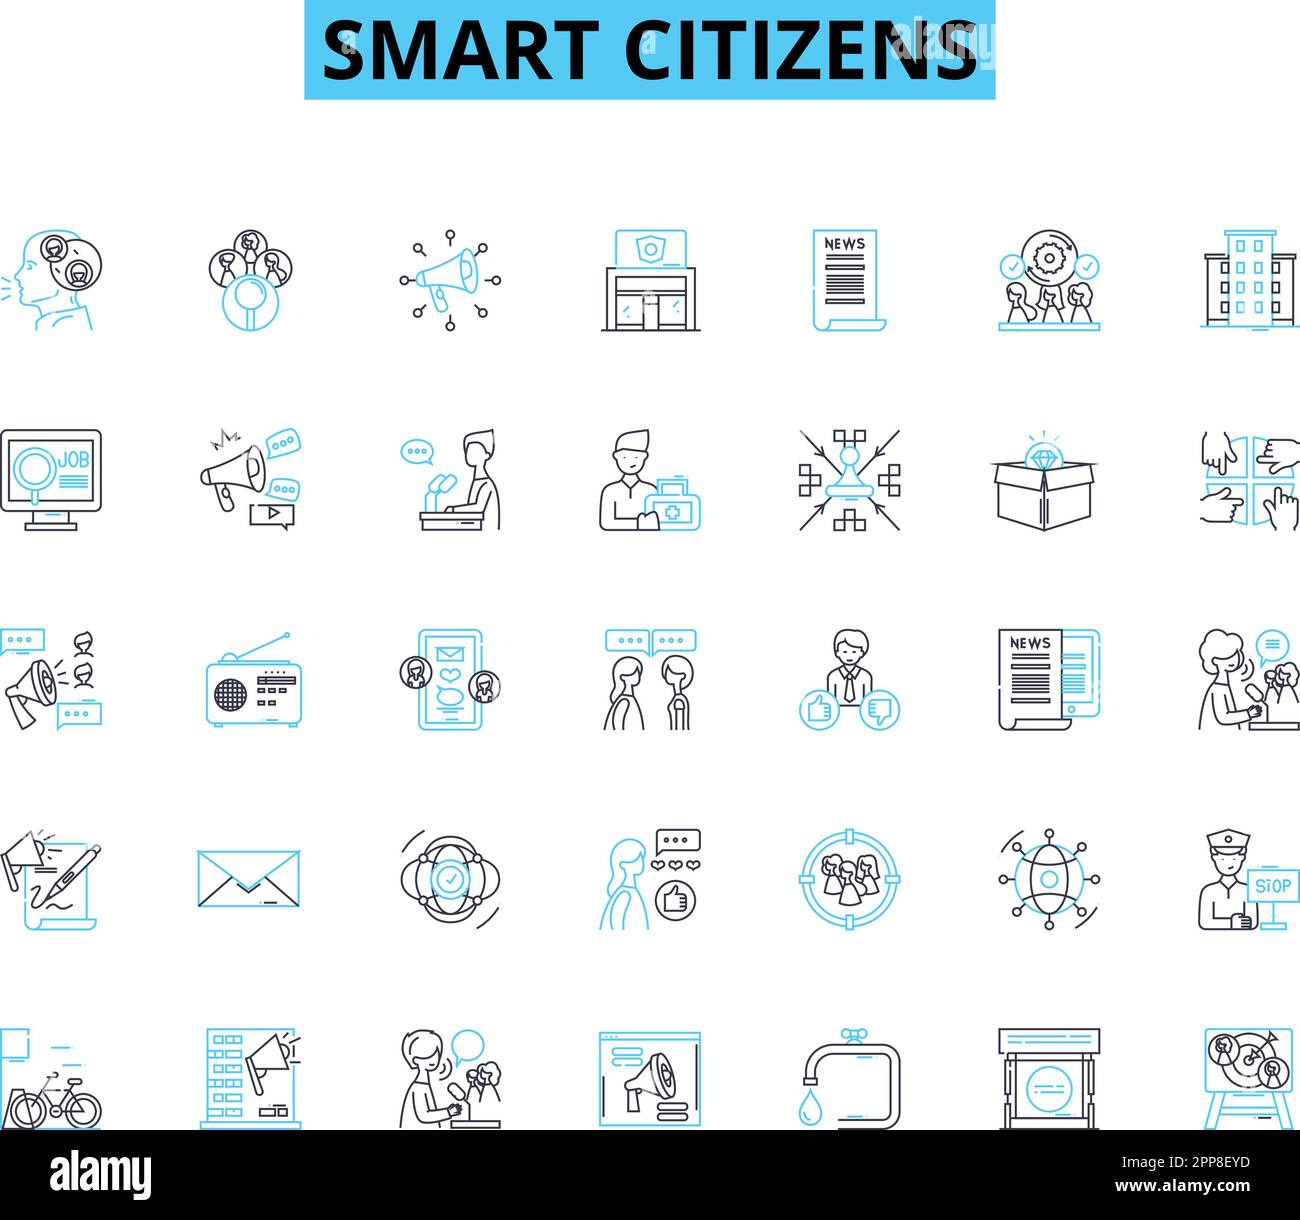 Smart citizens linear icons set. Connected, Digital, Innovative, Aware, Proactive, Collaborative, Engaged line vector and concept signs. Efficient Stock Vector